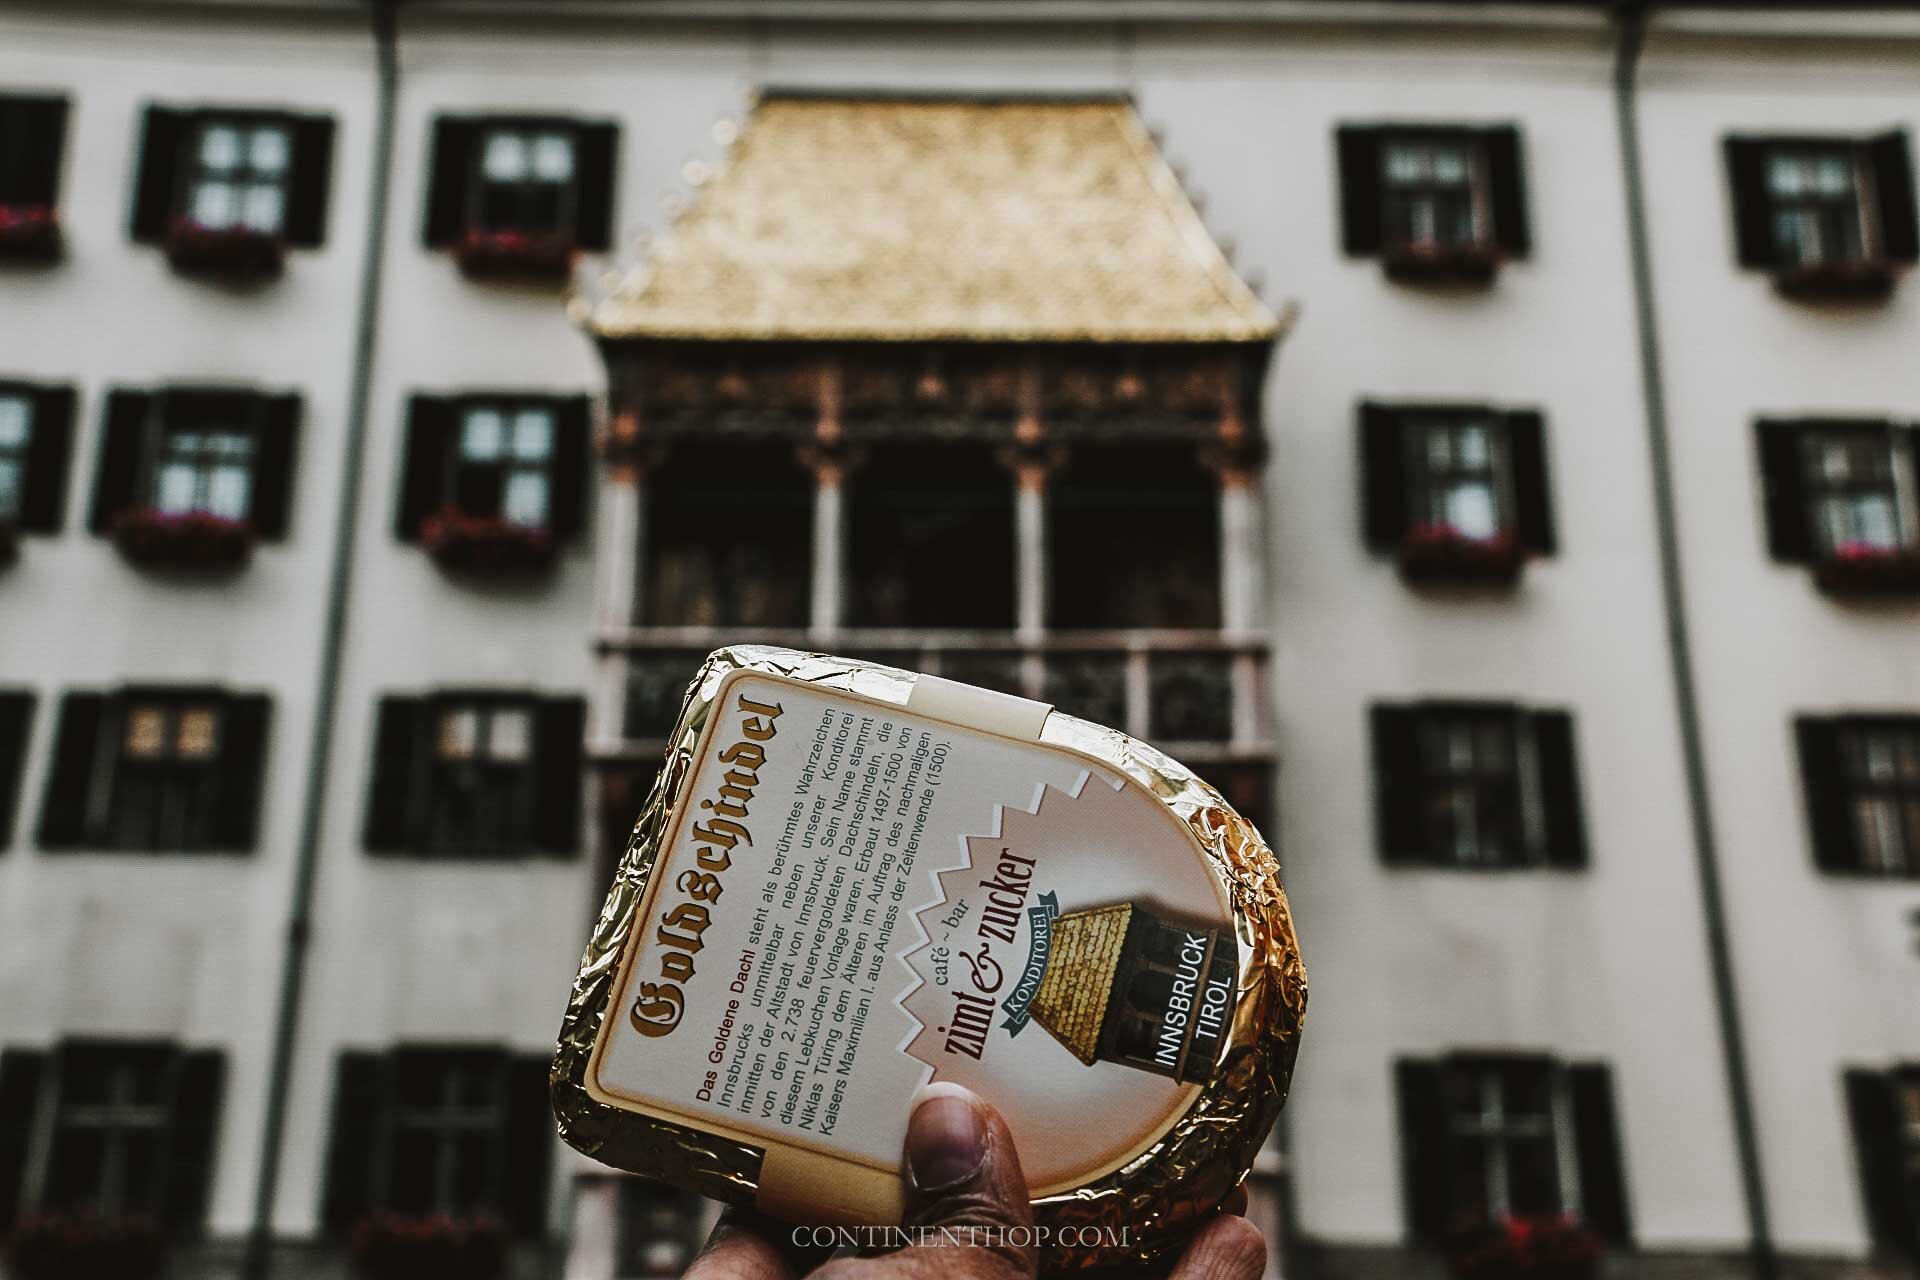 A cookie shaped like a tile from the golden roof from Zimt and Zucker in Innsbruck